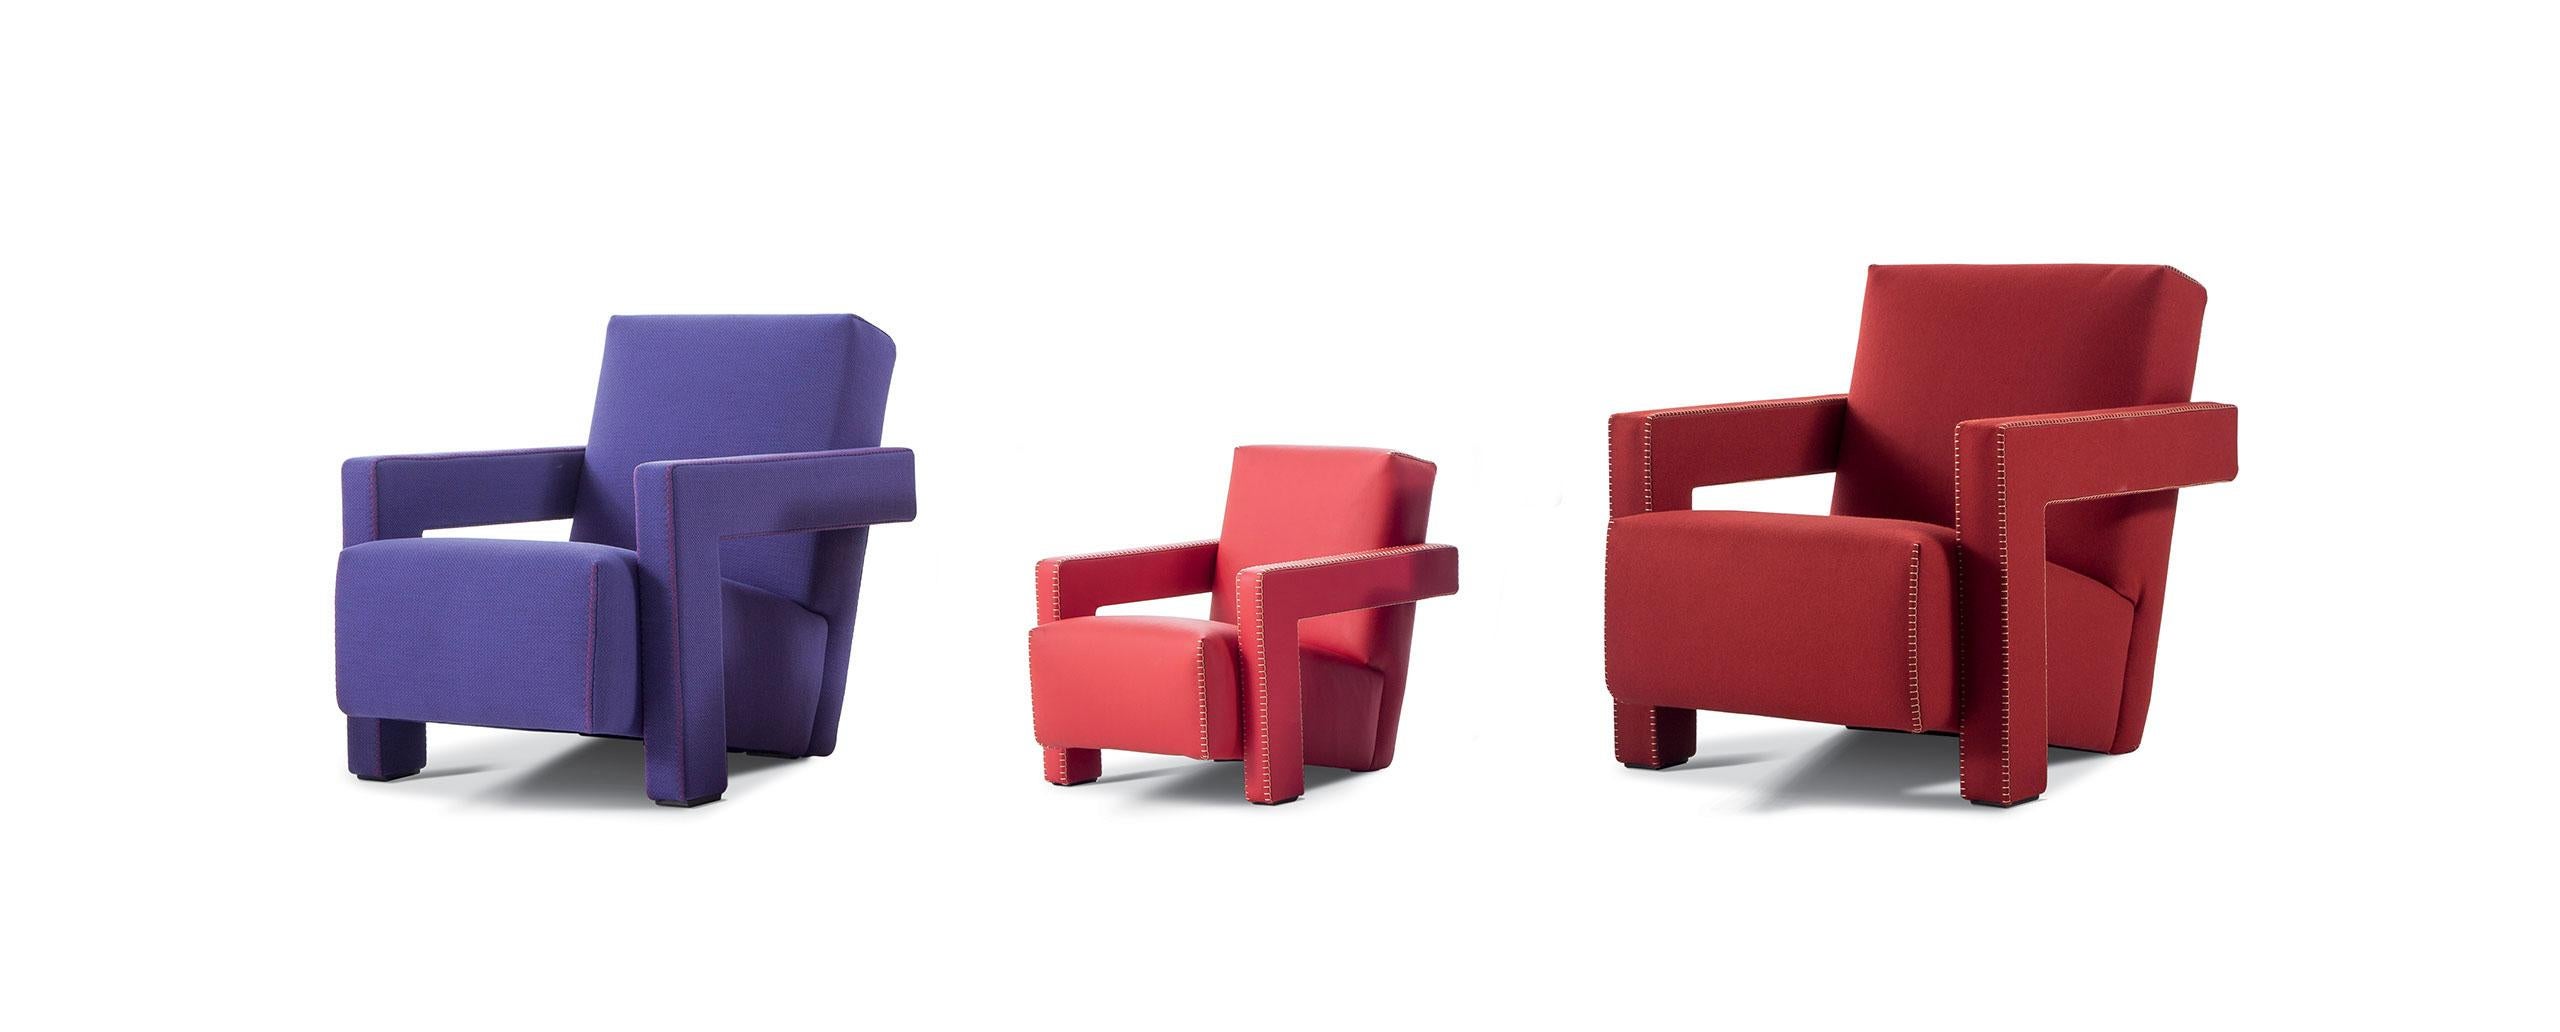 Armchair designed by Gerrit Thomas Rietveld in 1935. Relaunched in 2015.
Manufactured by Cassina in Italy.

Cassina offers a new reinterpretation of the iconic model dated 1935: it is a new version, with reduced sizes to be ergonomically suited to